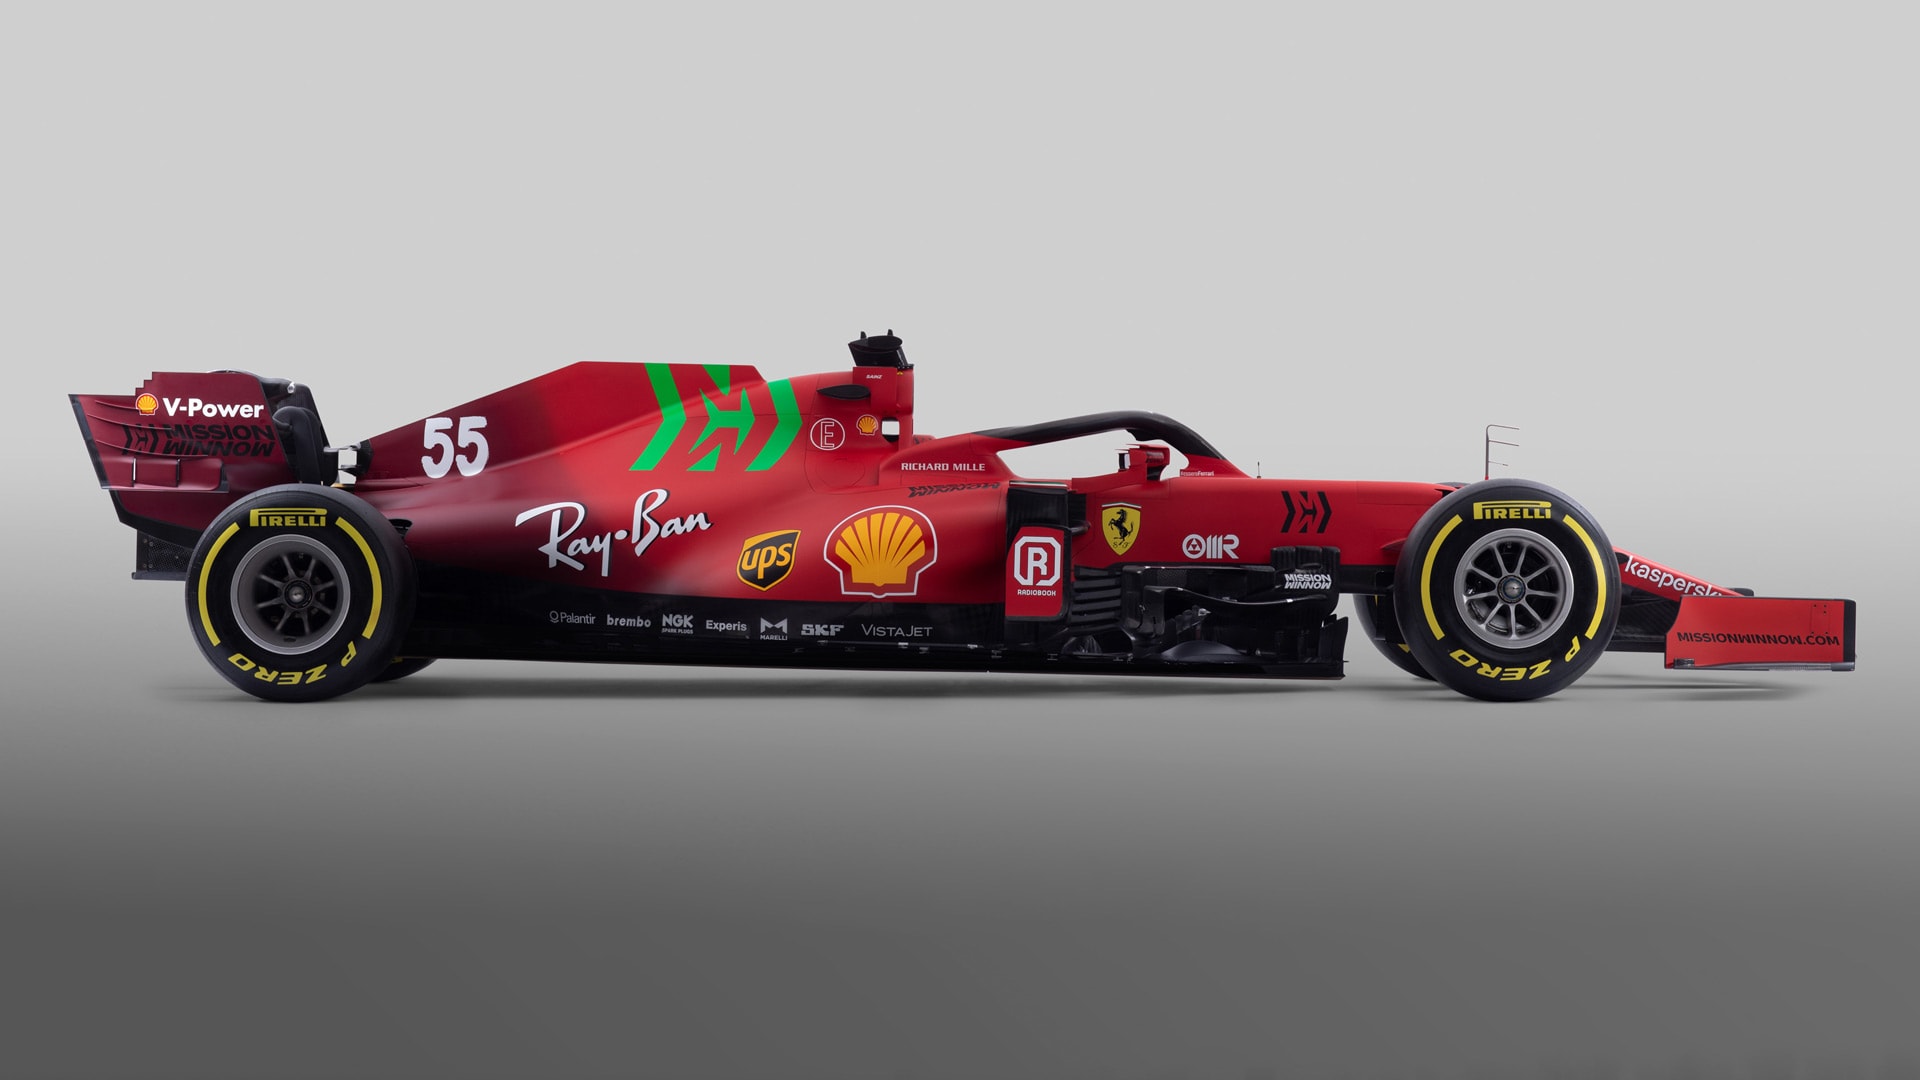 socket Preference Limited FIRST LOOK: Ferrari unveil hotly-anticipated SF21 F1 car – with splash of  green on traditional red livery | Formula 1®